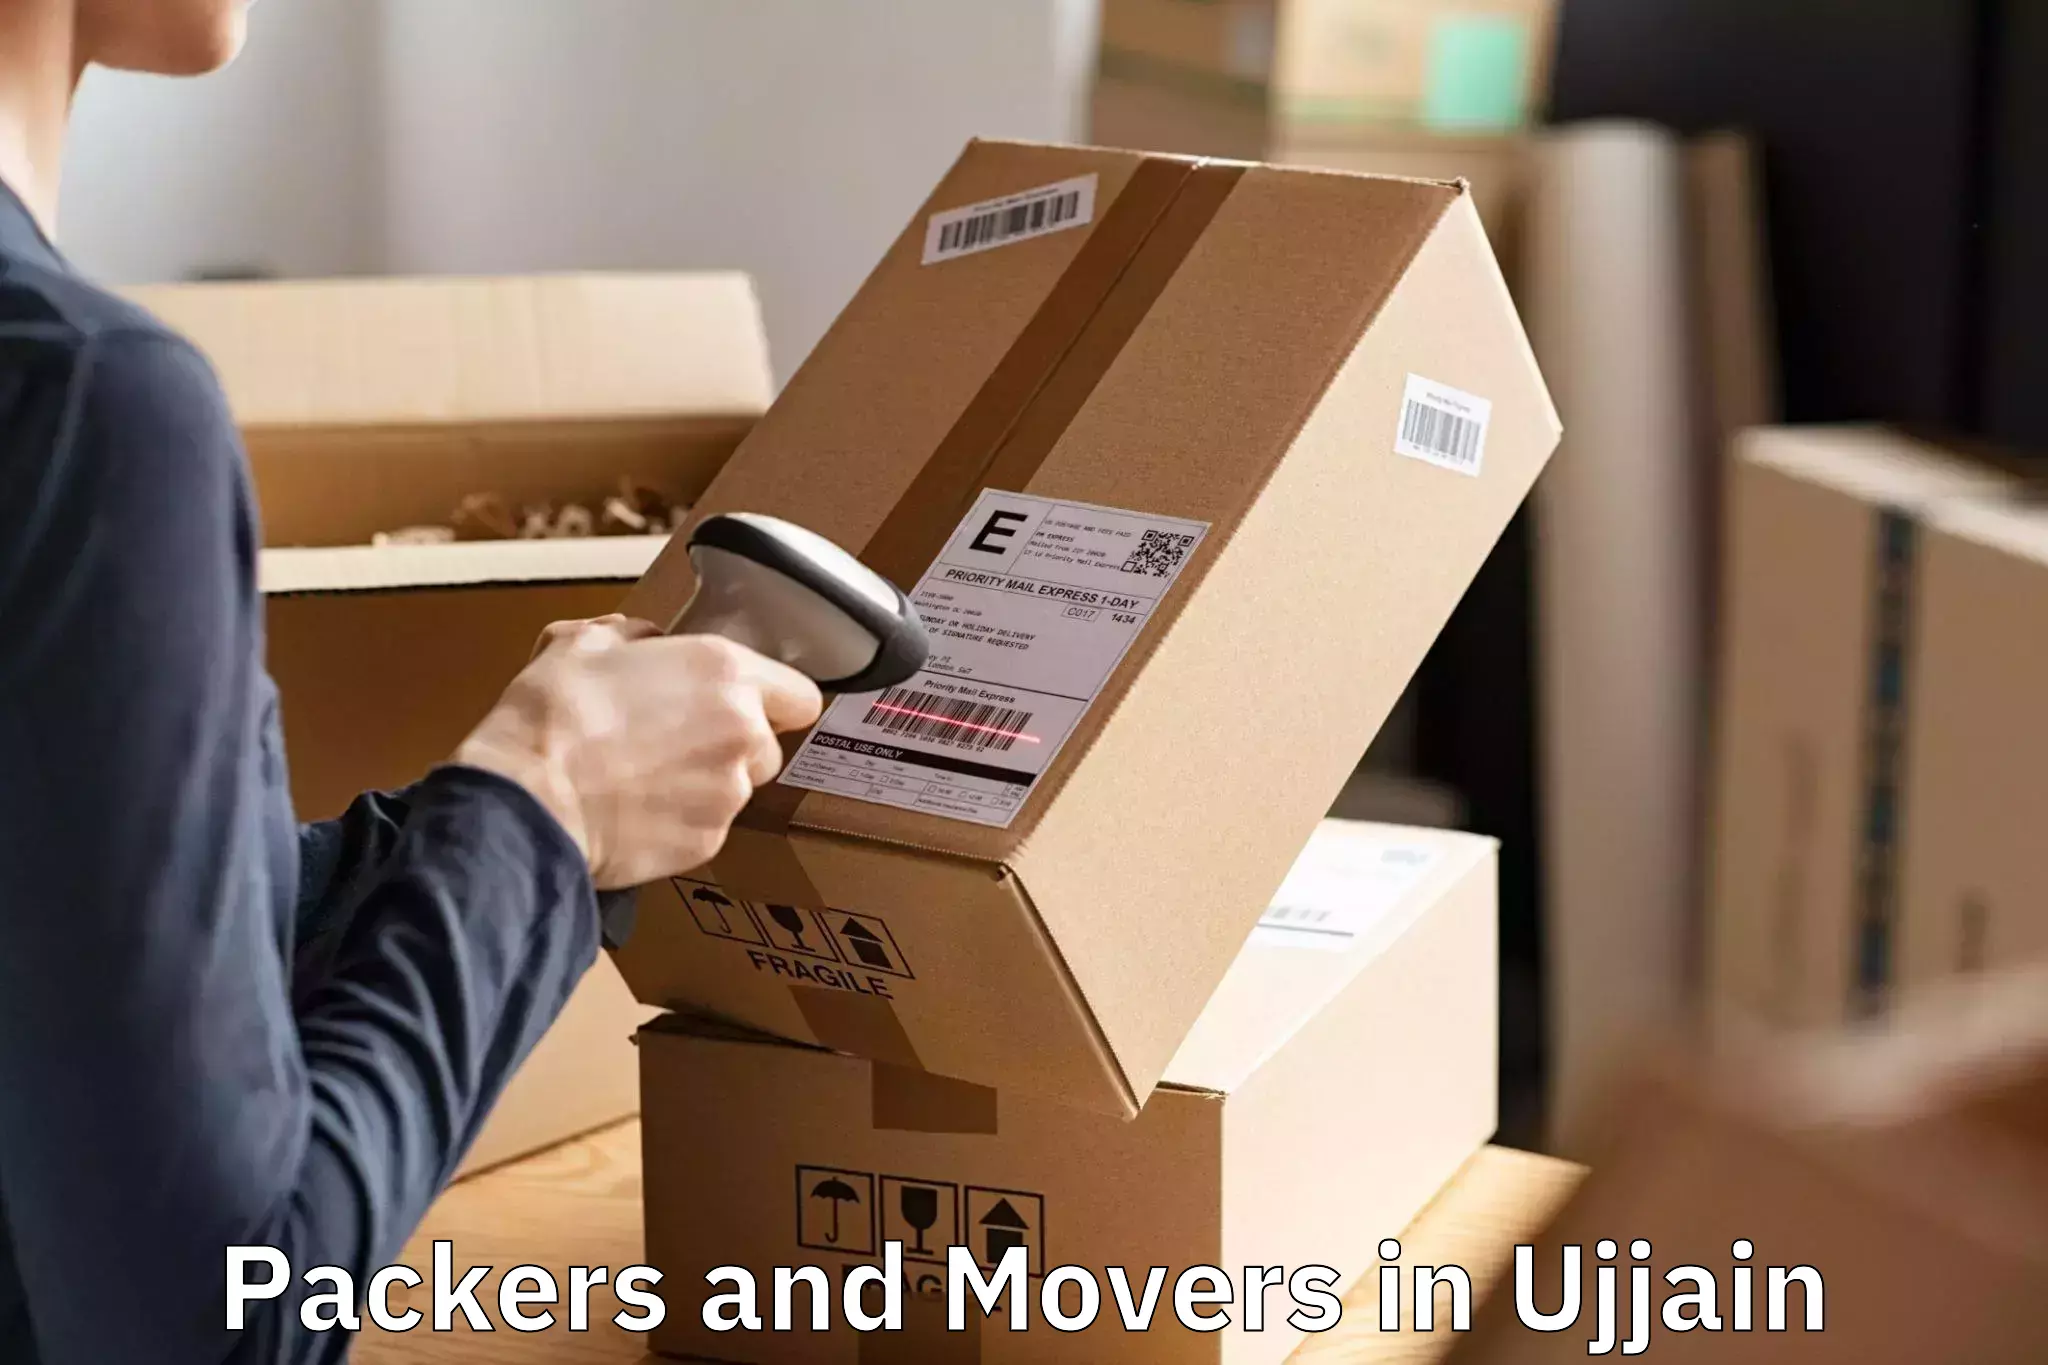 Reliable Packers And Movers Available in Ujjain, Madhya Pradesh (MP)